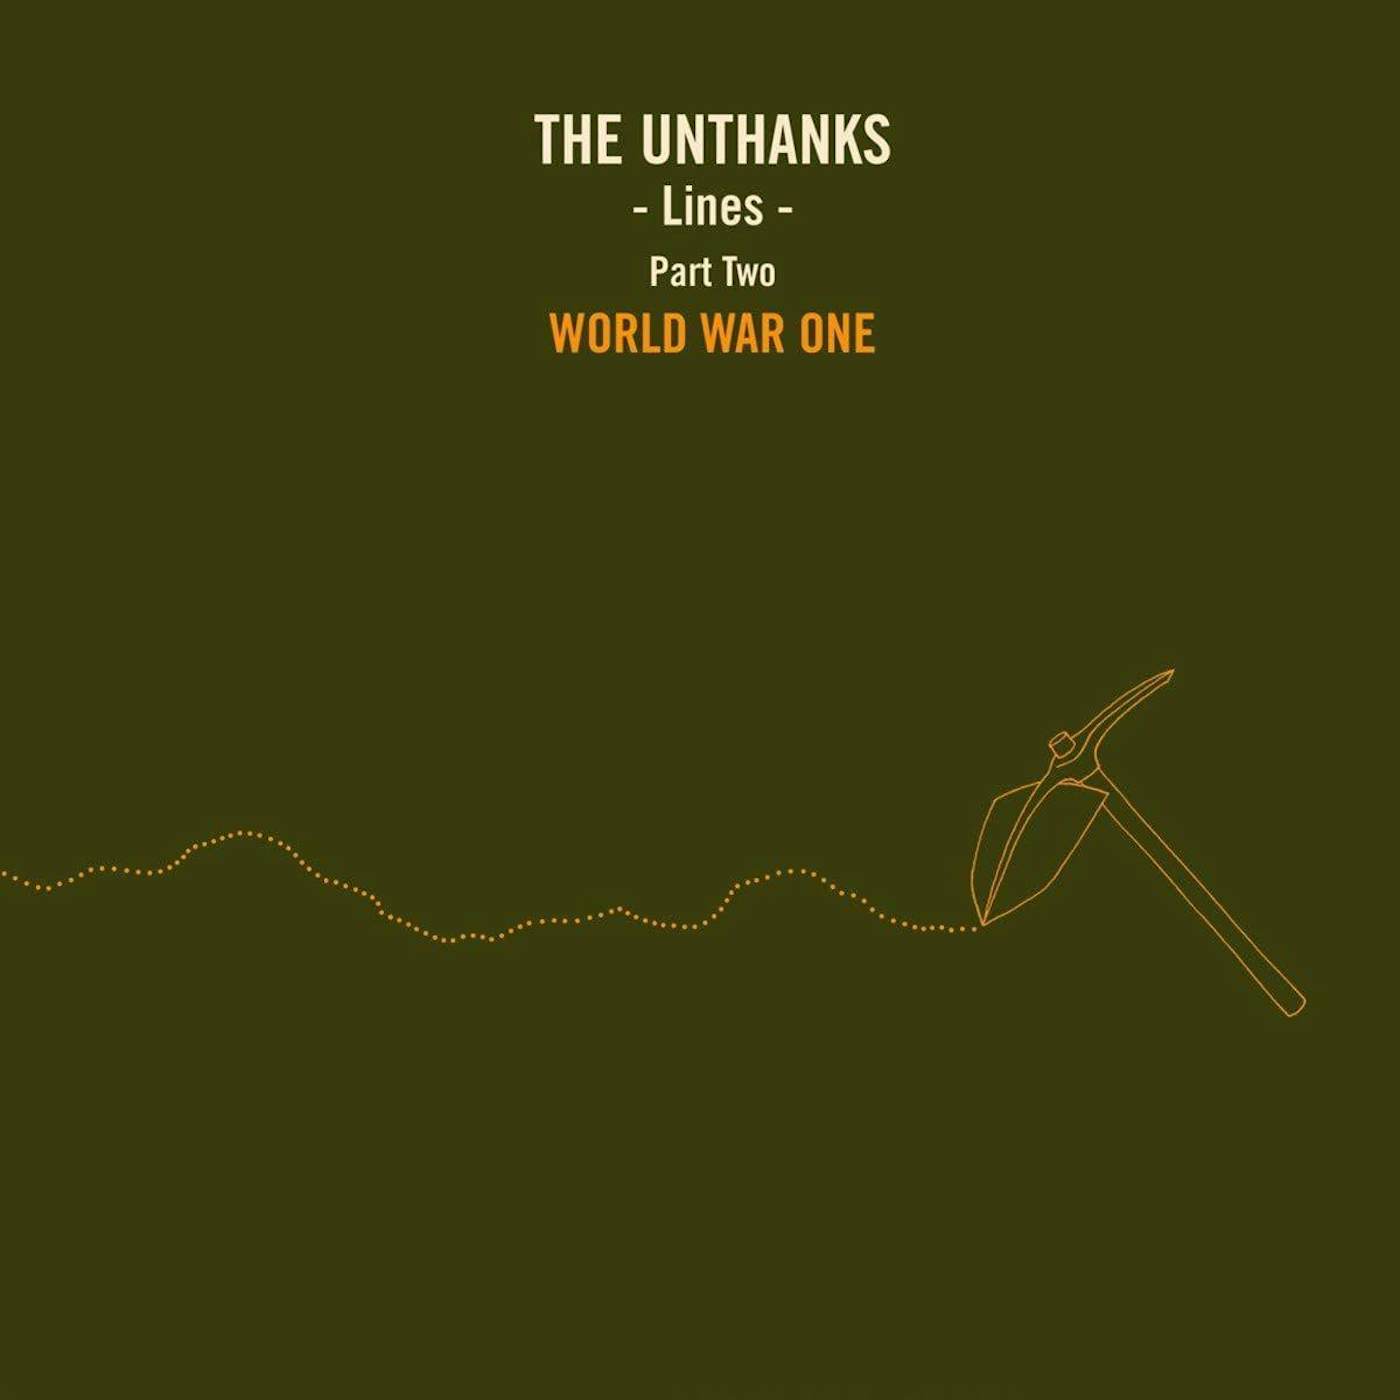 The Unthanks, The LP - Lines - Part Two: World War One (10 Inch Lp) (Vinyl)